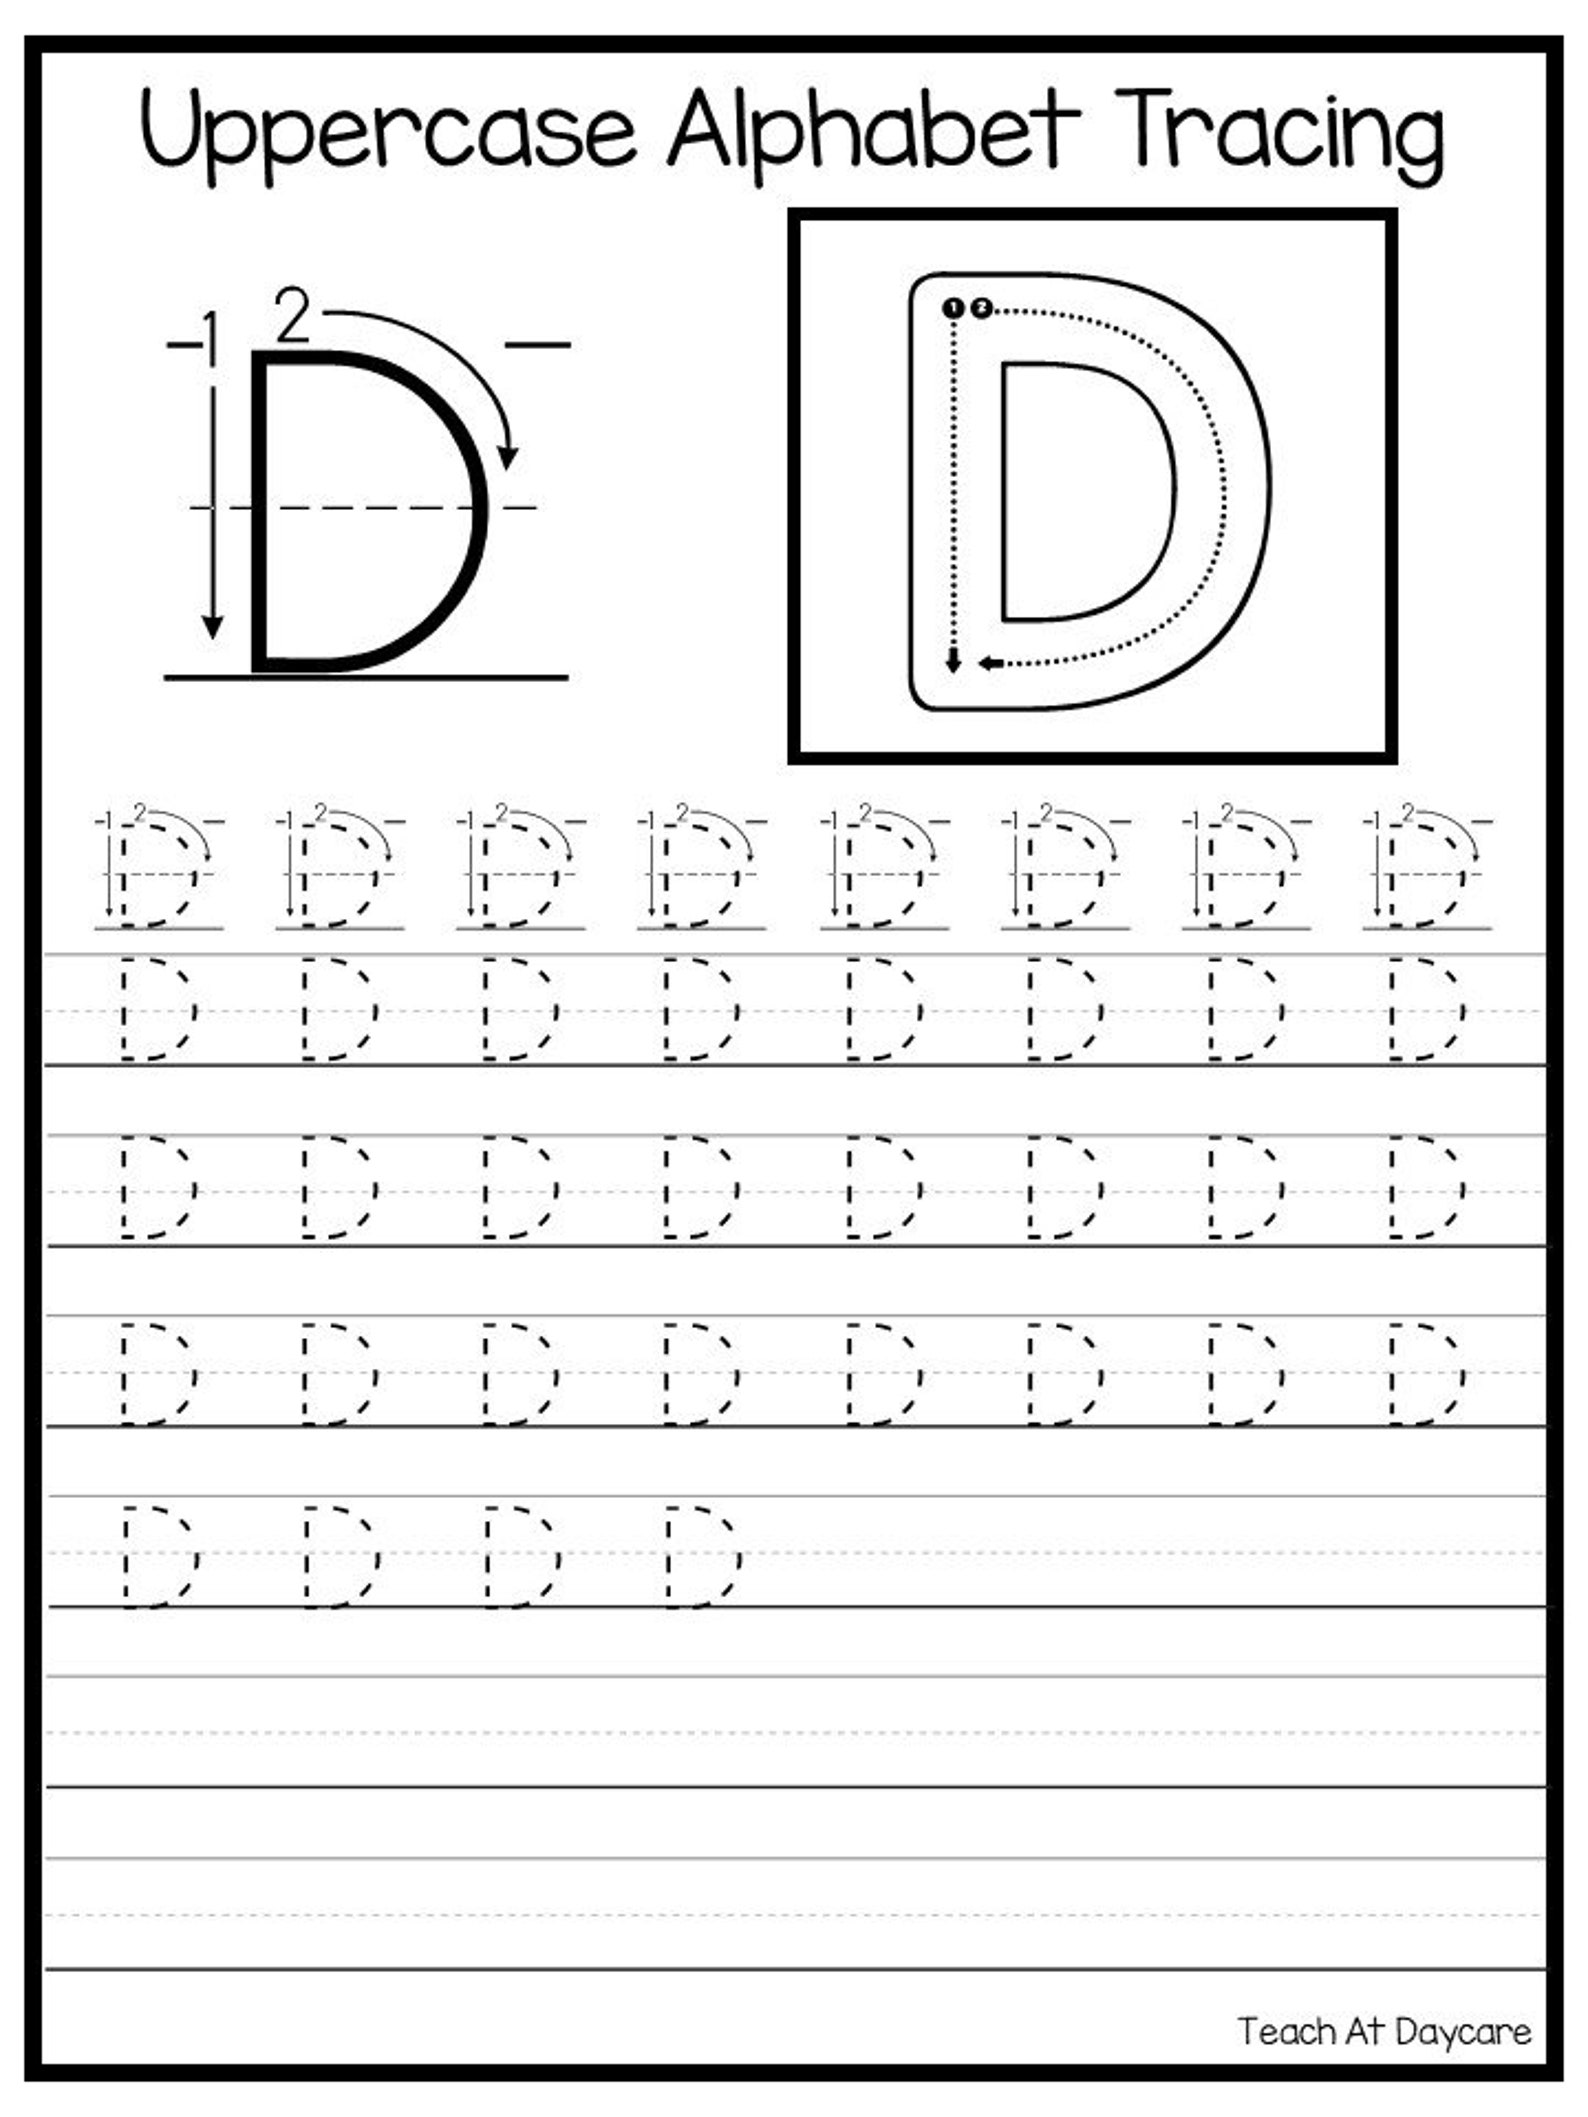 26 Printable Uppercase Alphabet Tracing Worksheets. | Etsy